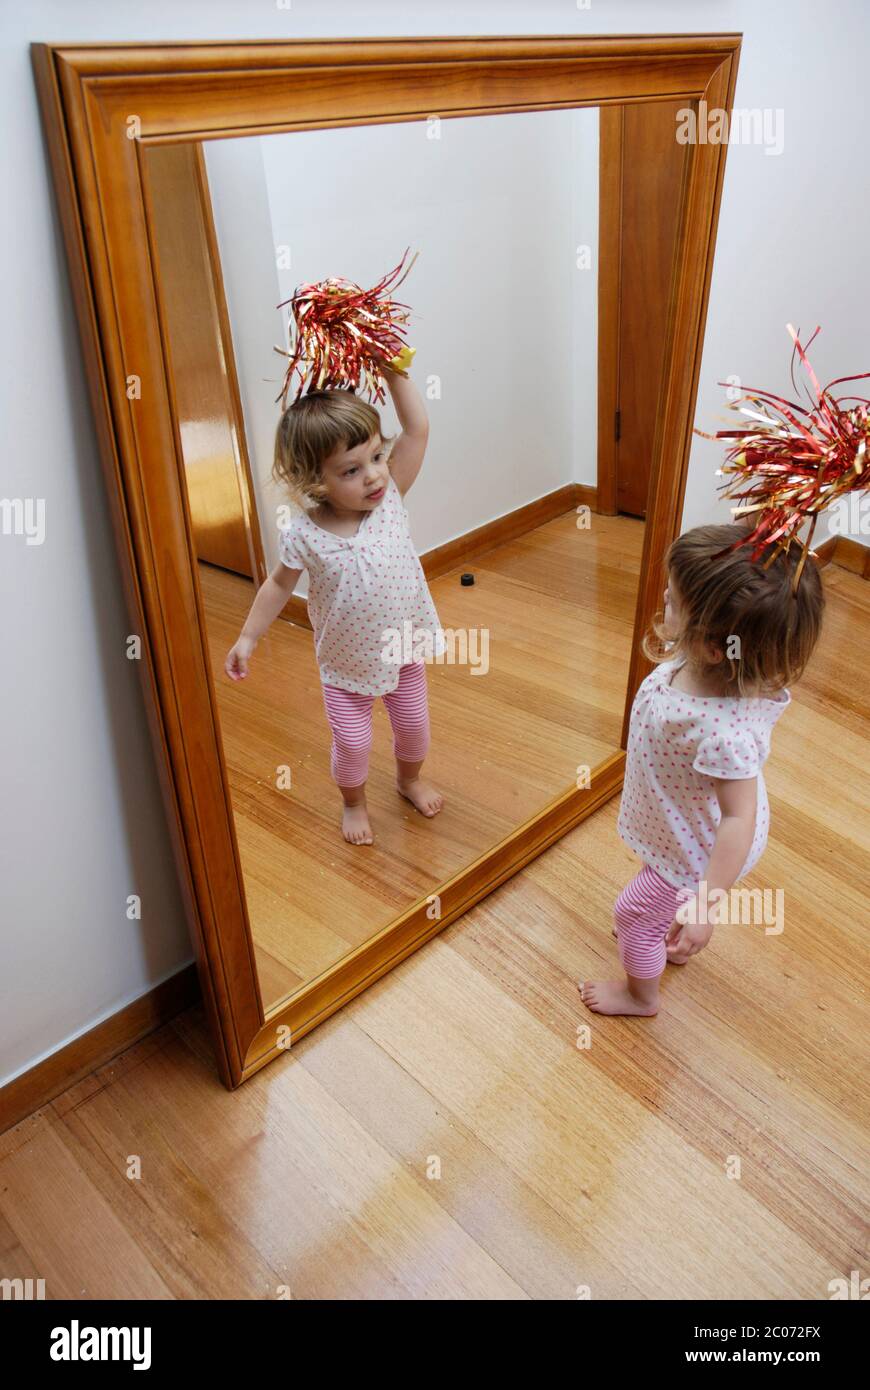 A young girl, two and a half years old, playing in front of a large mirror. Stock Photo